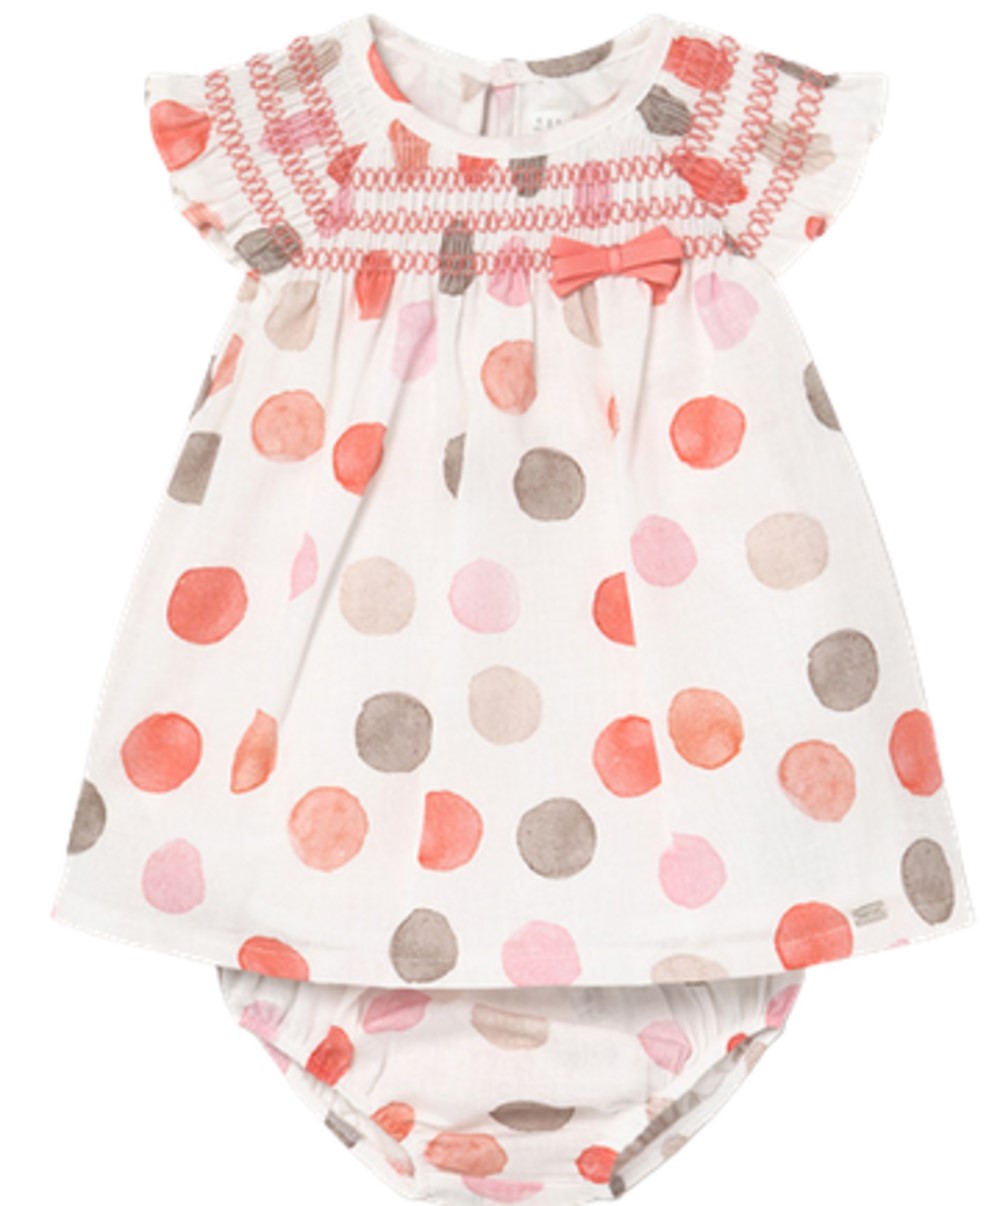 MAYORAL 1826 BABY GIRLS SORBET LINEN DRESS WITH POLKA DOTS AND MATCHING PANTIES